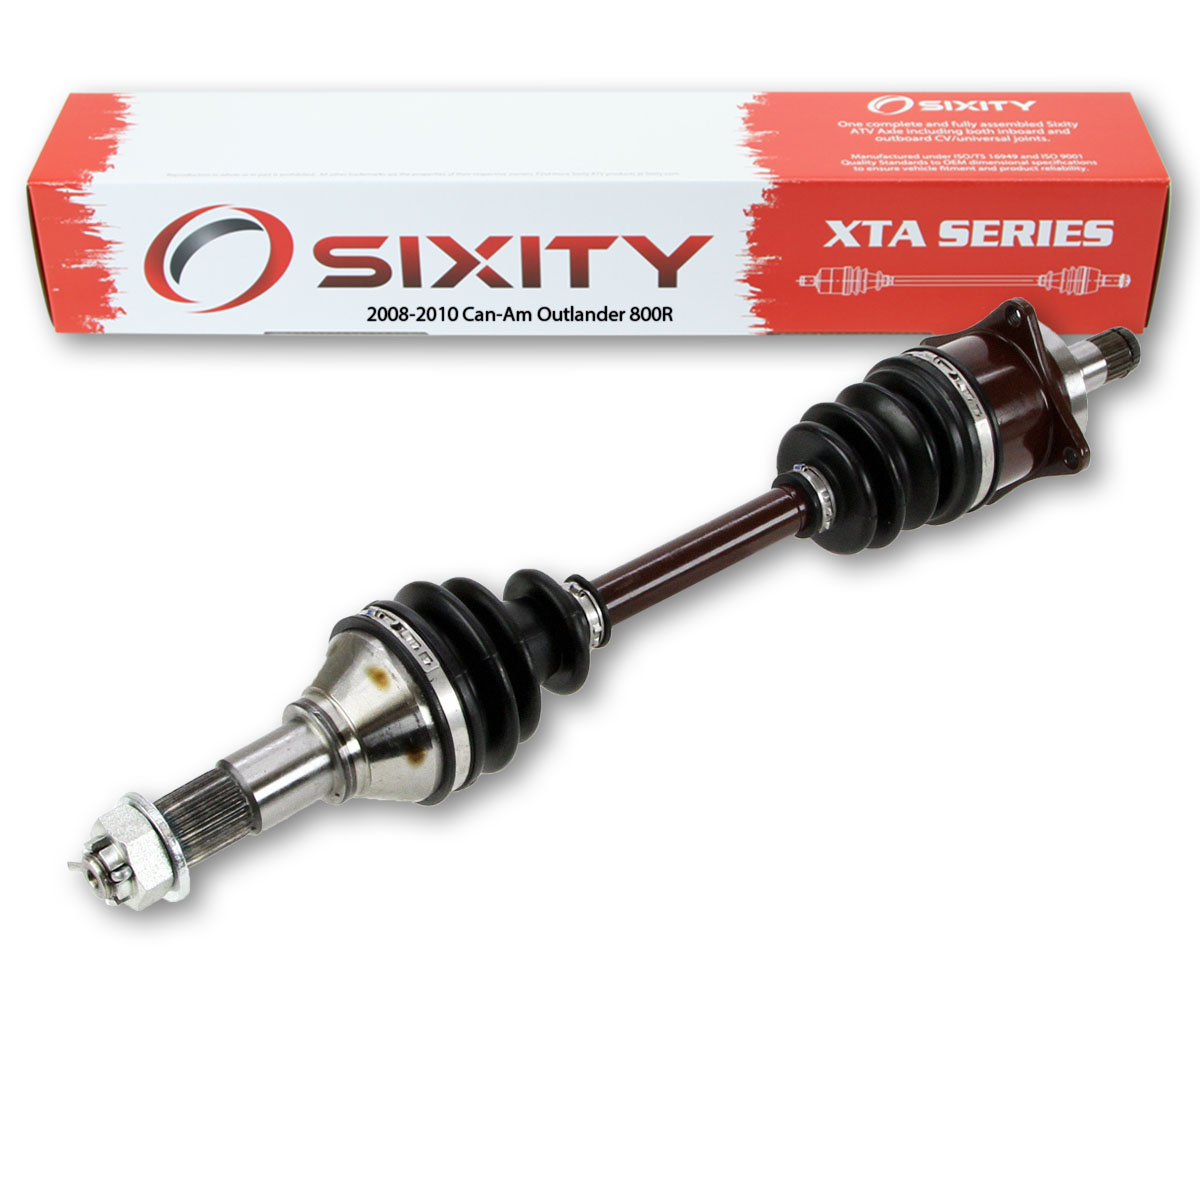 Sixity 2010 Can-Am Outlander 800R 4X4 Front Left XTA ATV Axle